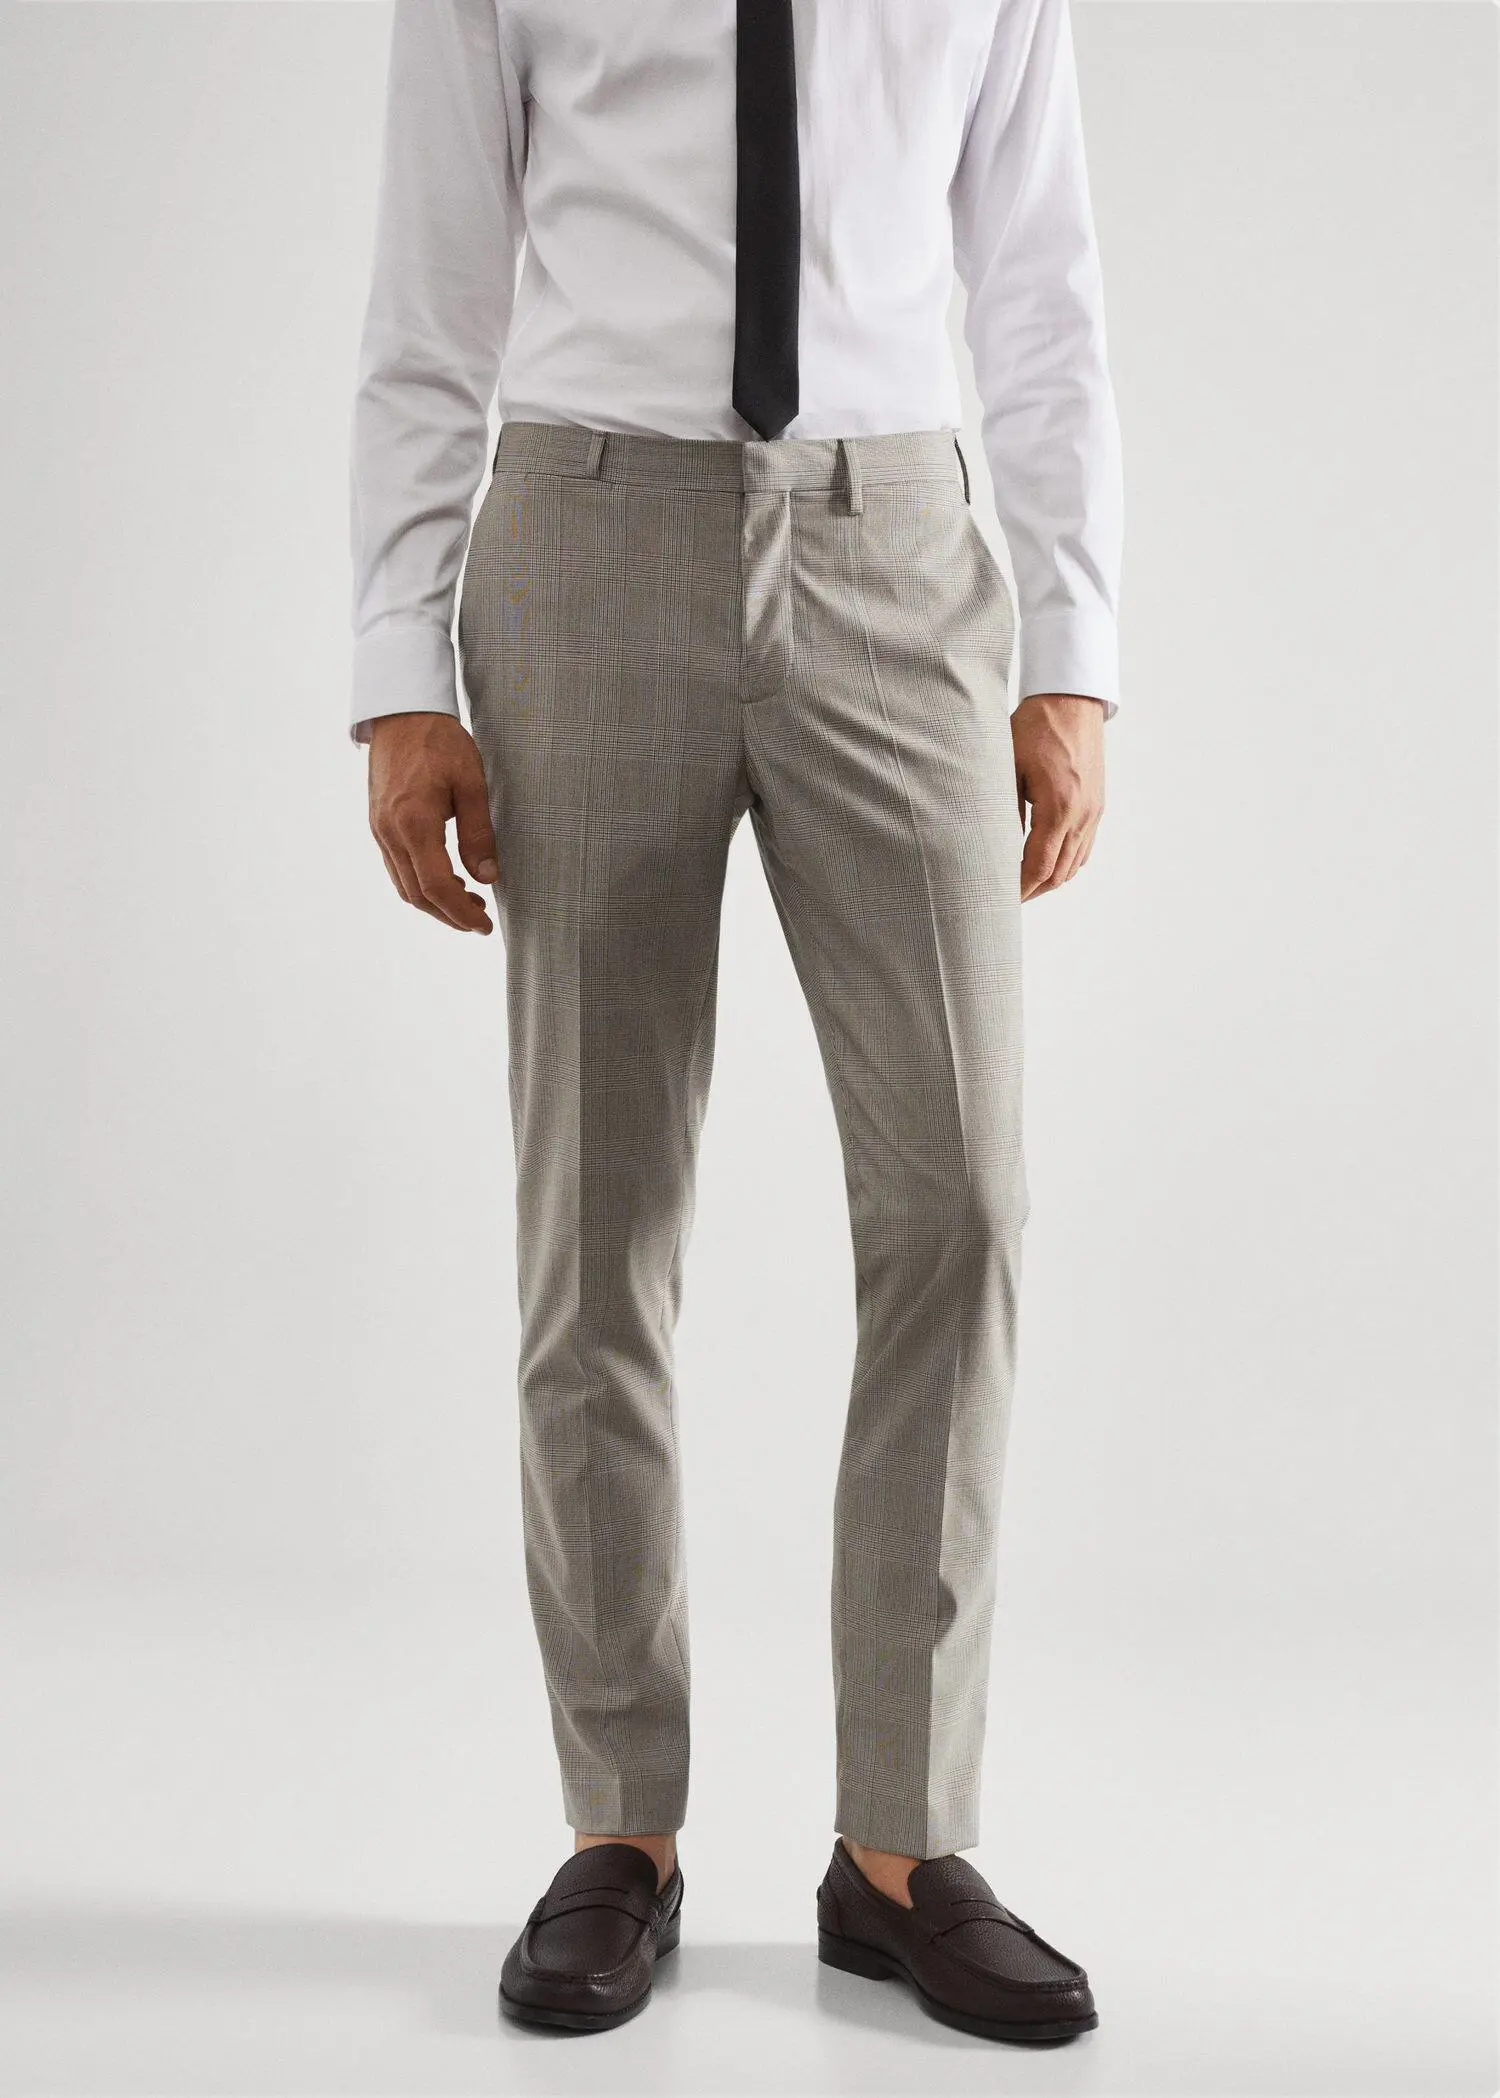 Mango Super slim-fit printed suit trousers. a man wearing a suit and tie standing in front of a white wall. 